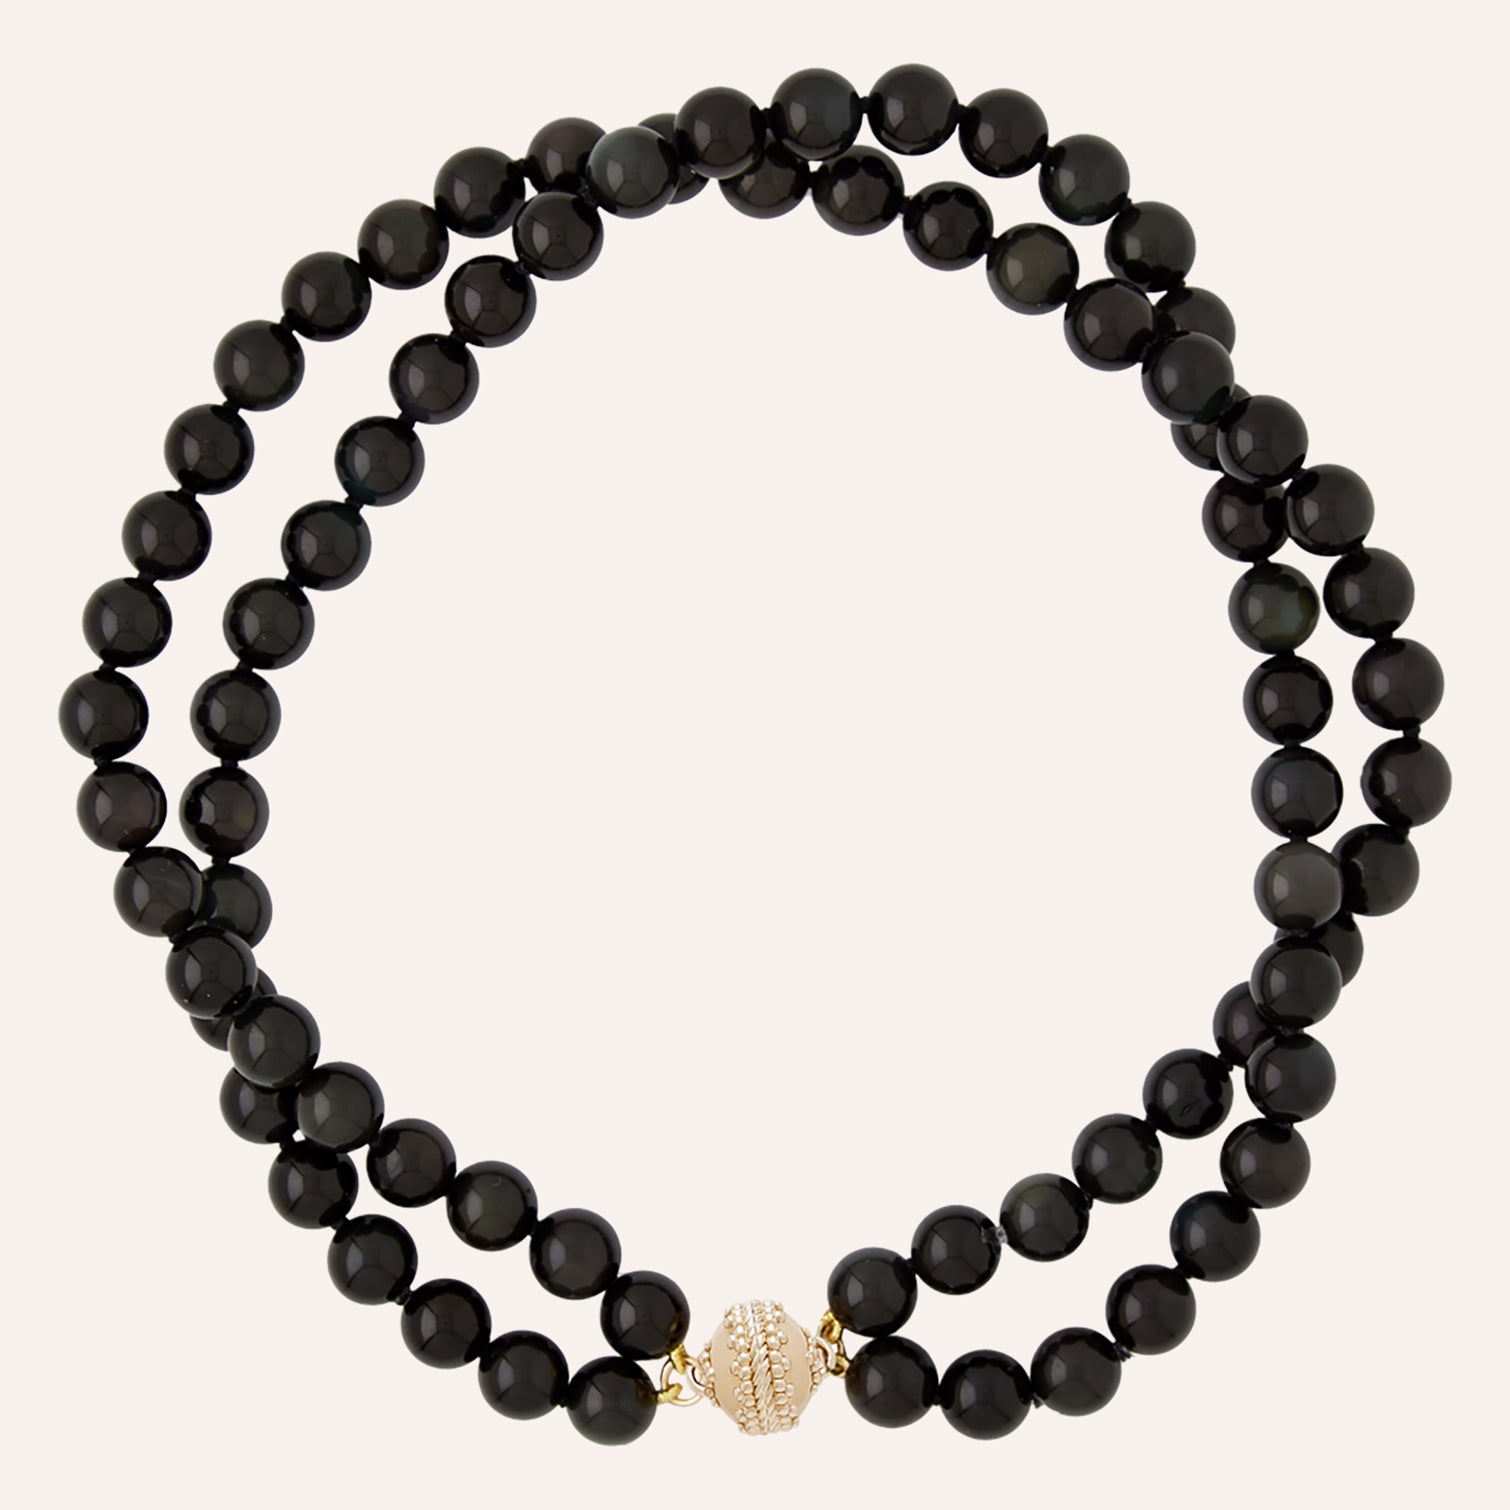 Victoire Black Obsidian 10mm Necklace